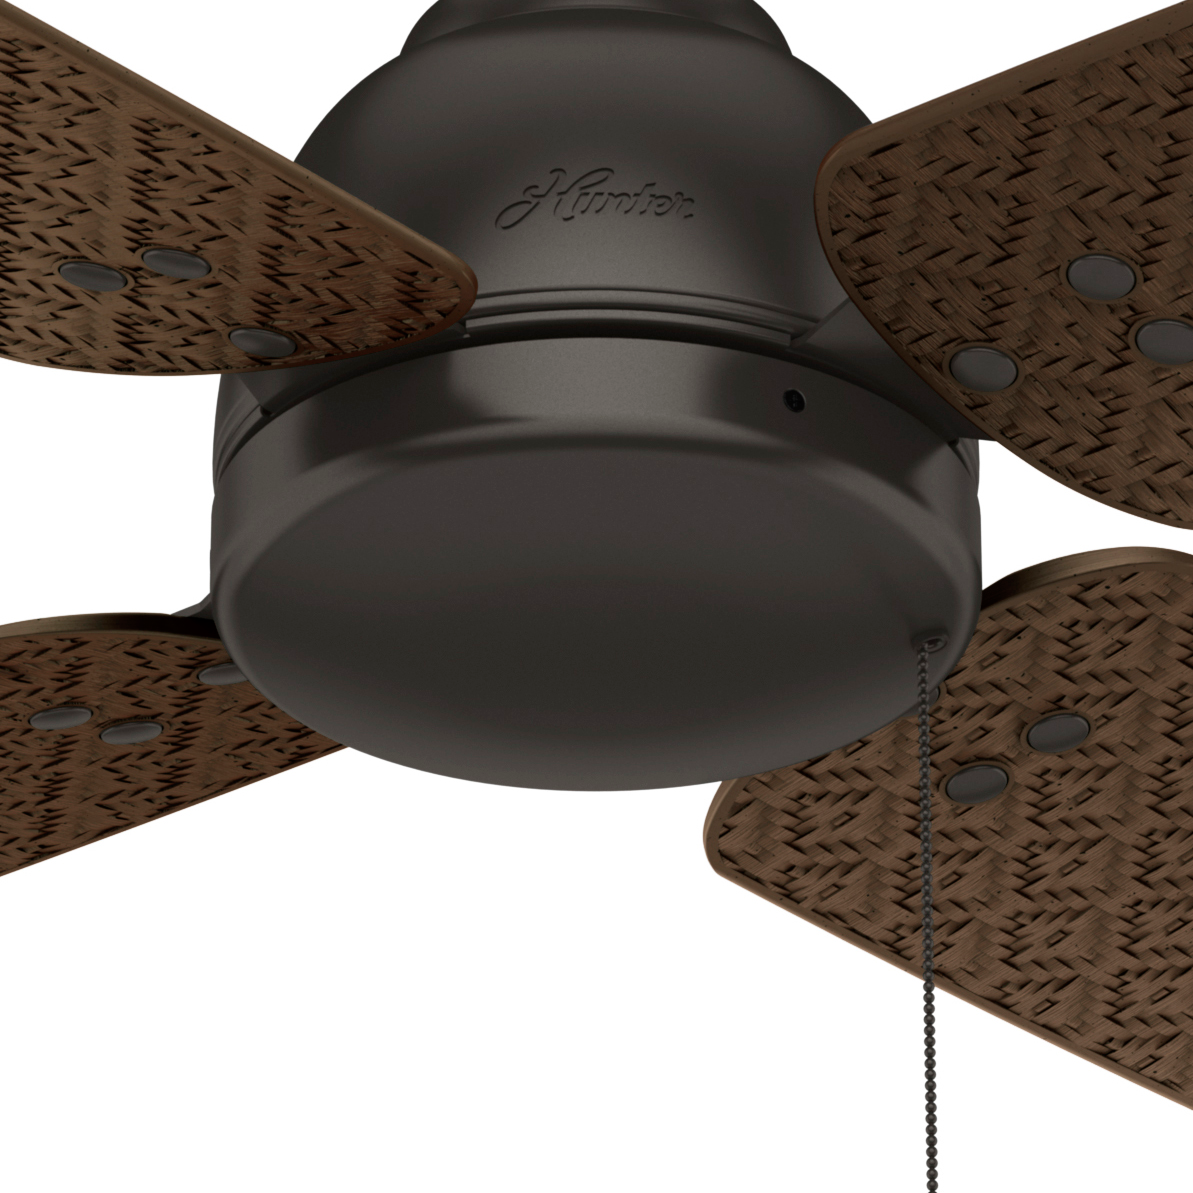 Hunter 52 inch Sunnyvale Damp Rated Ceiling Fan and Pull Chain Ceiling Fan Hunter   